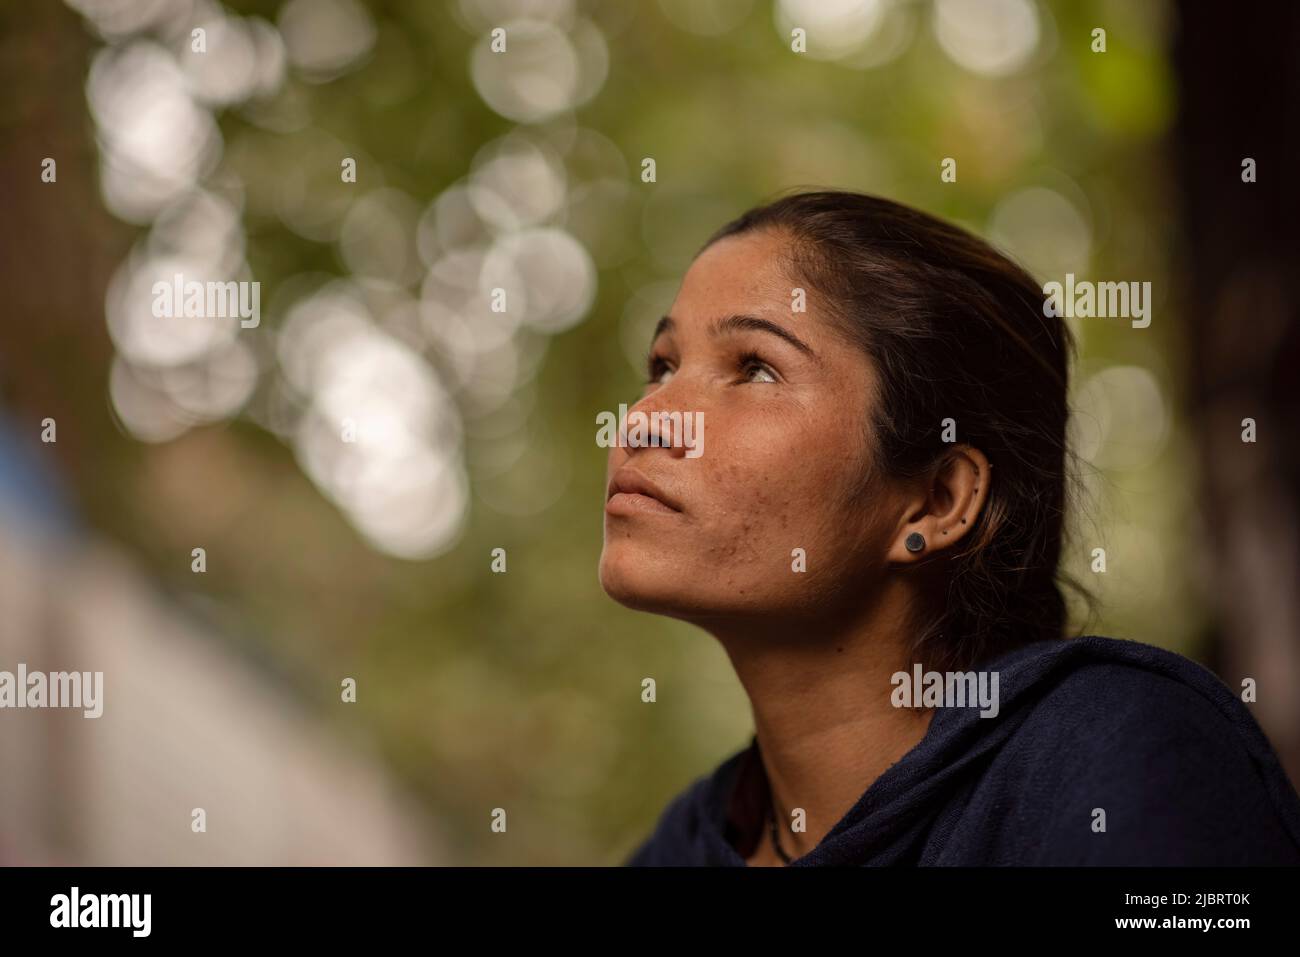 Close-up of a slum young woman thinking Stock Photo